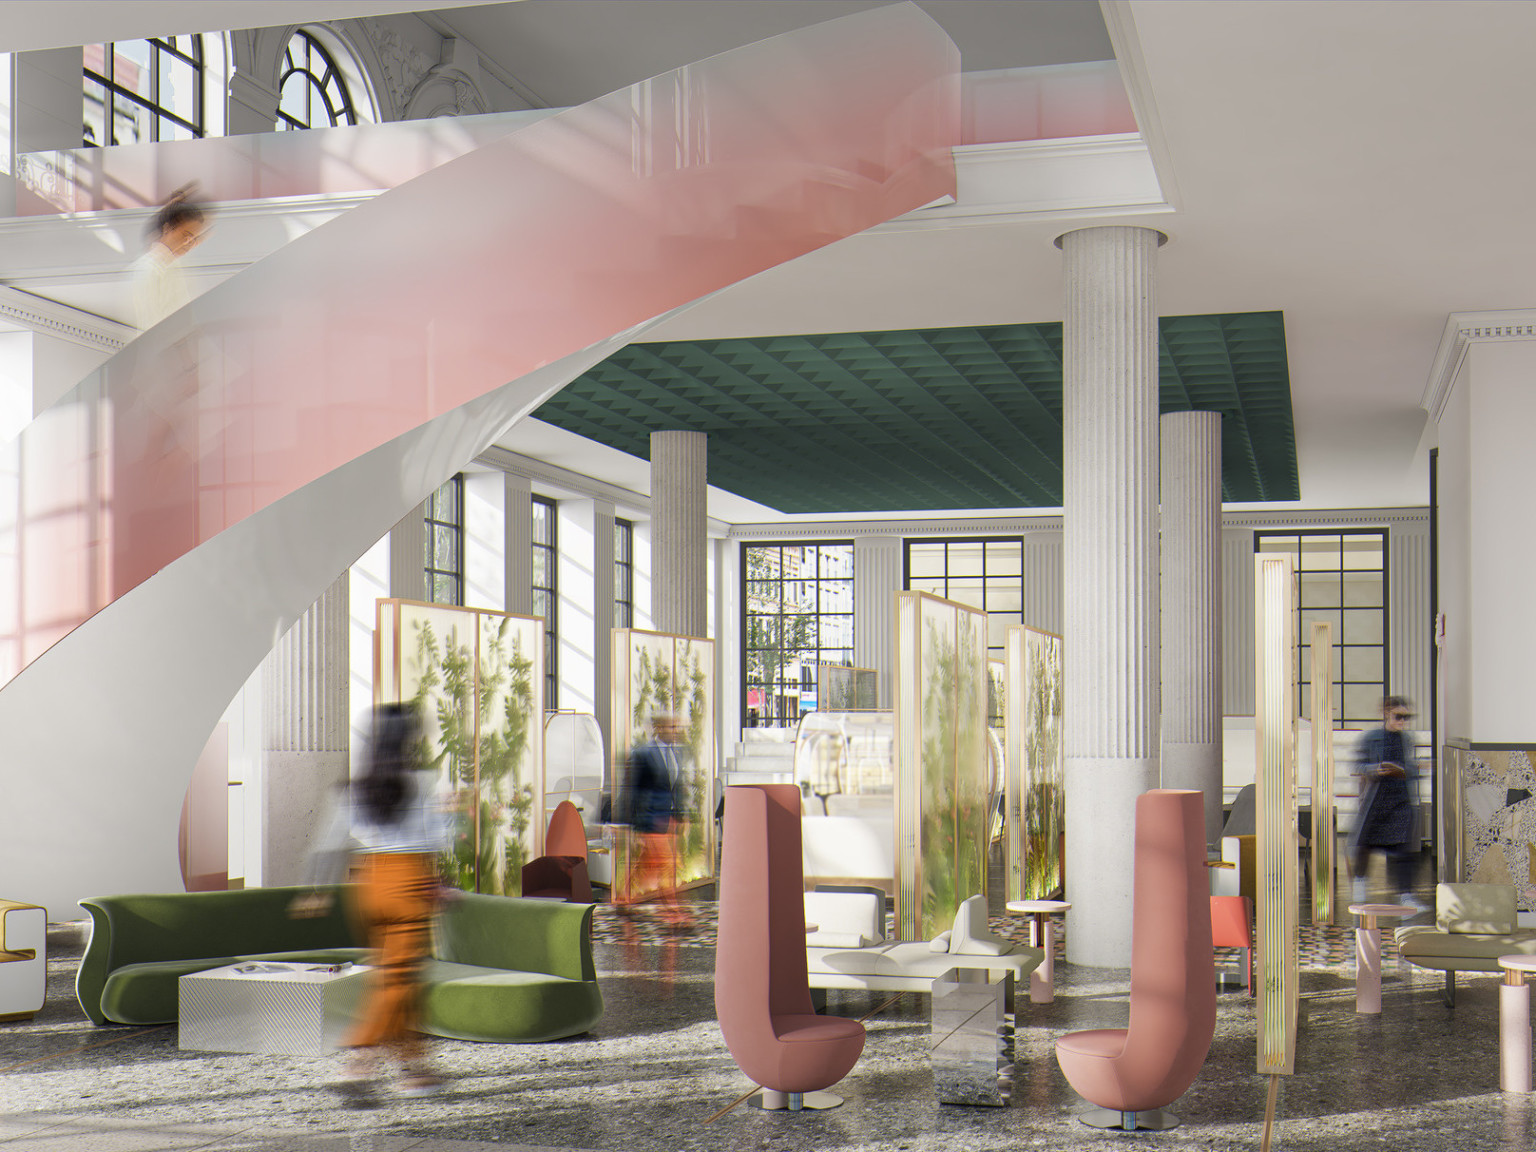 colorful and bright hotel lobby with millennial pink chairs and accent on spiral staircase, and partitions with plant designs